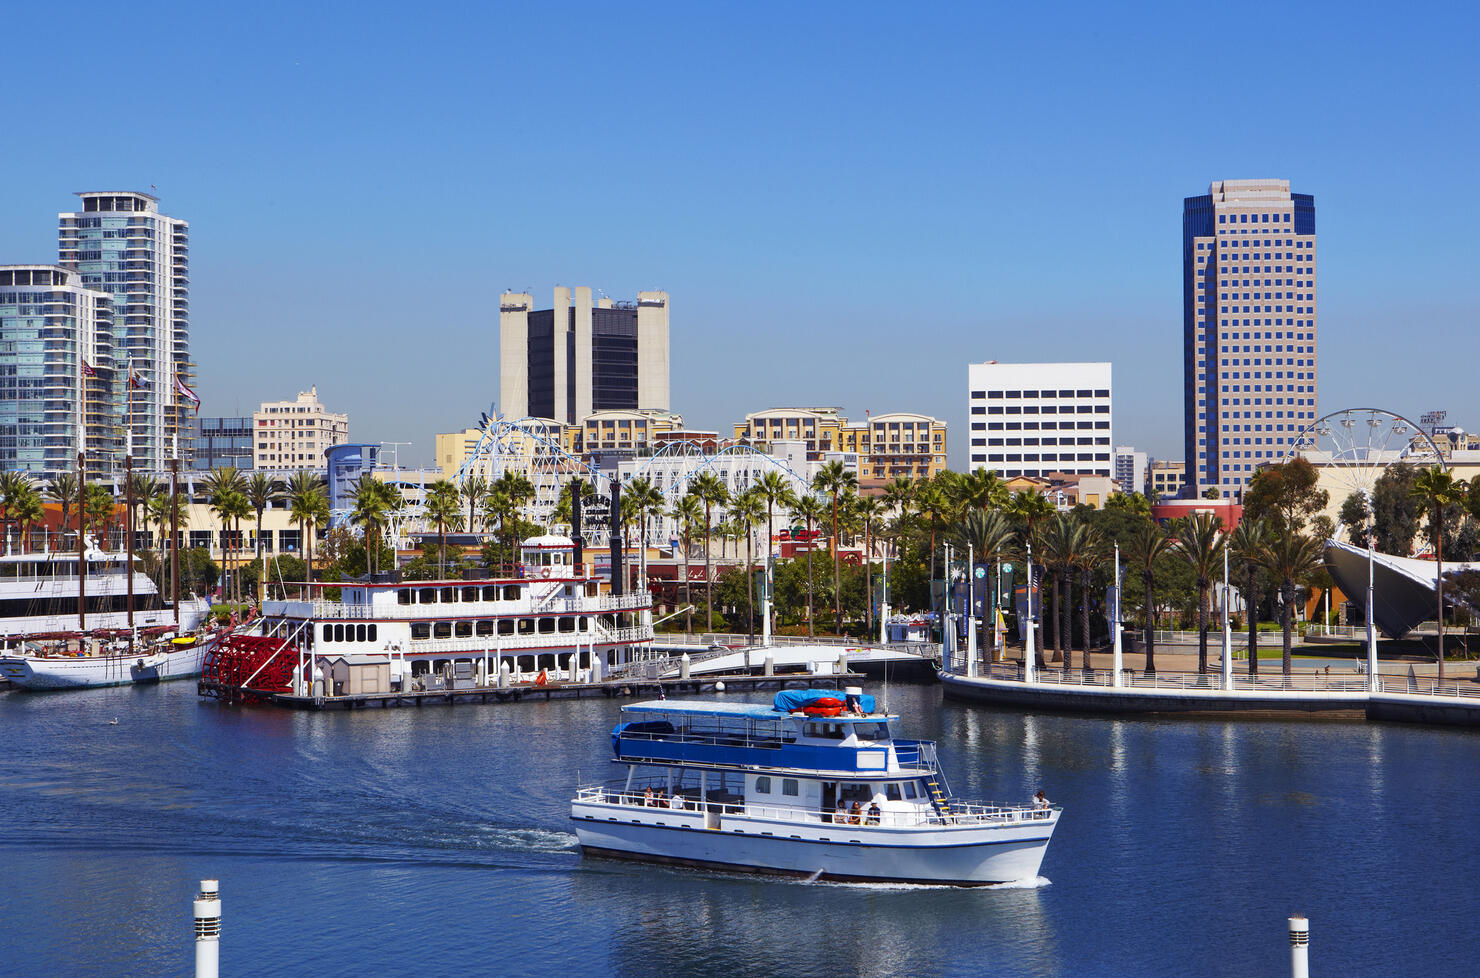 Sightseeing boat in the harbor of Long Beach.